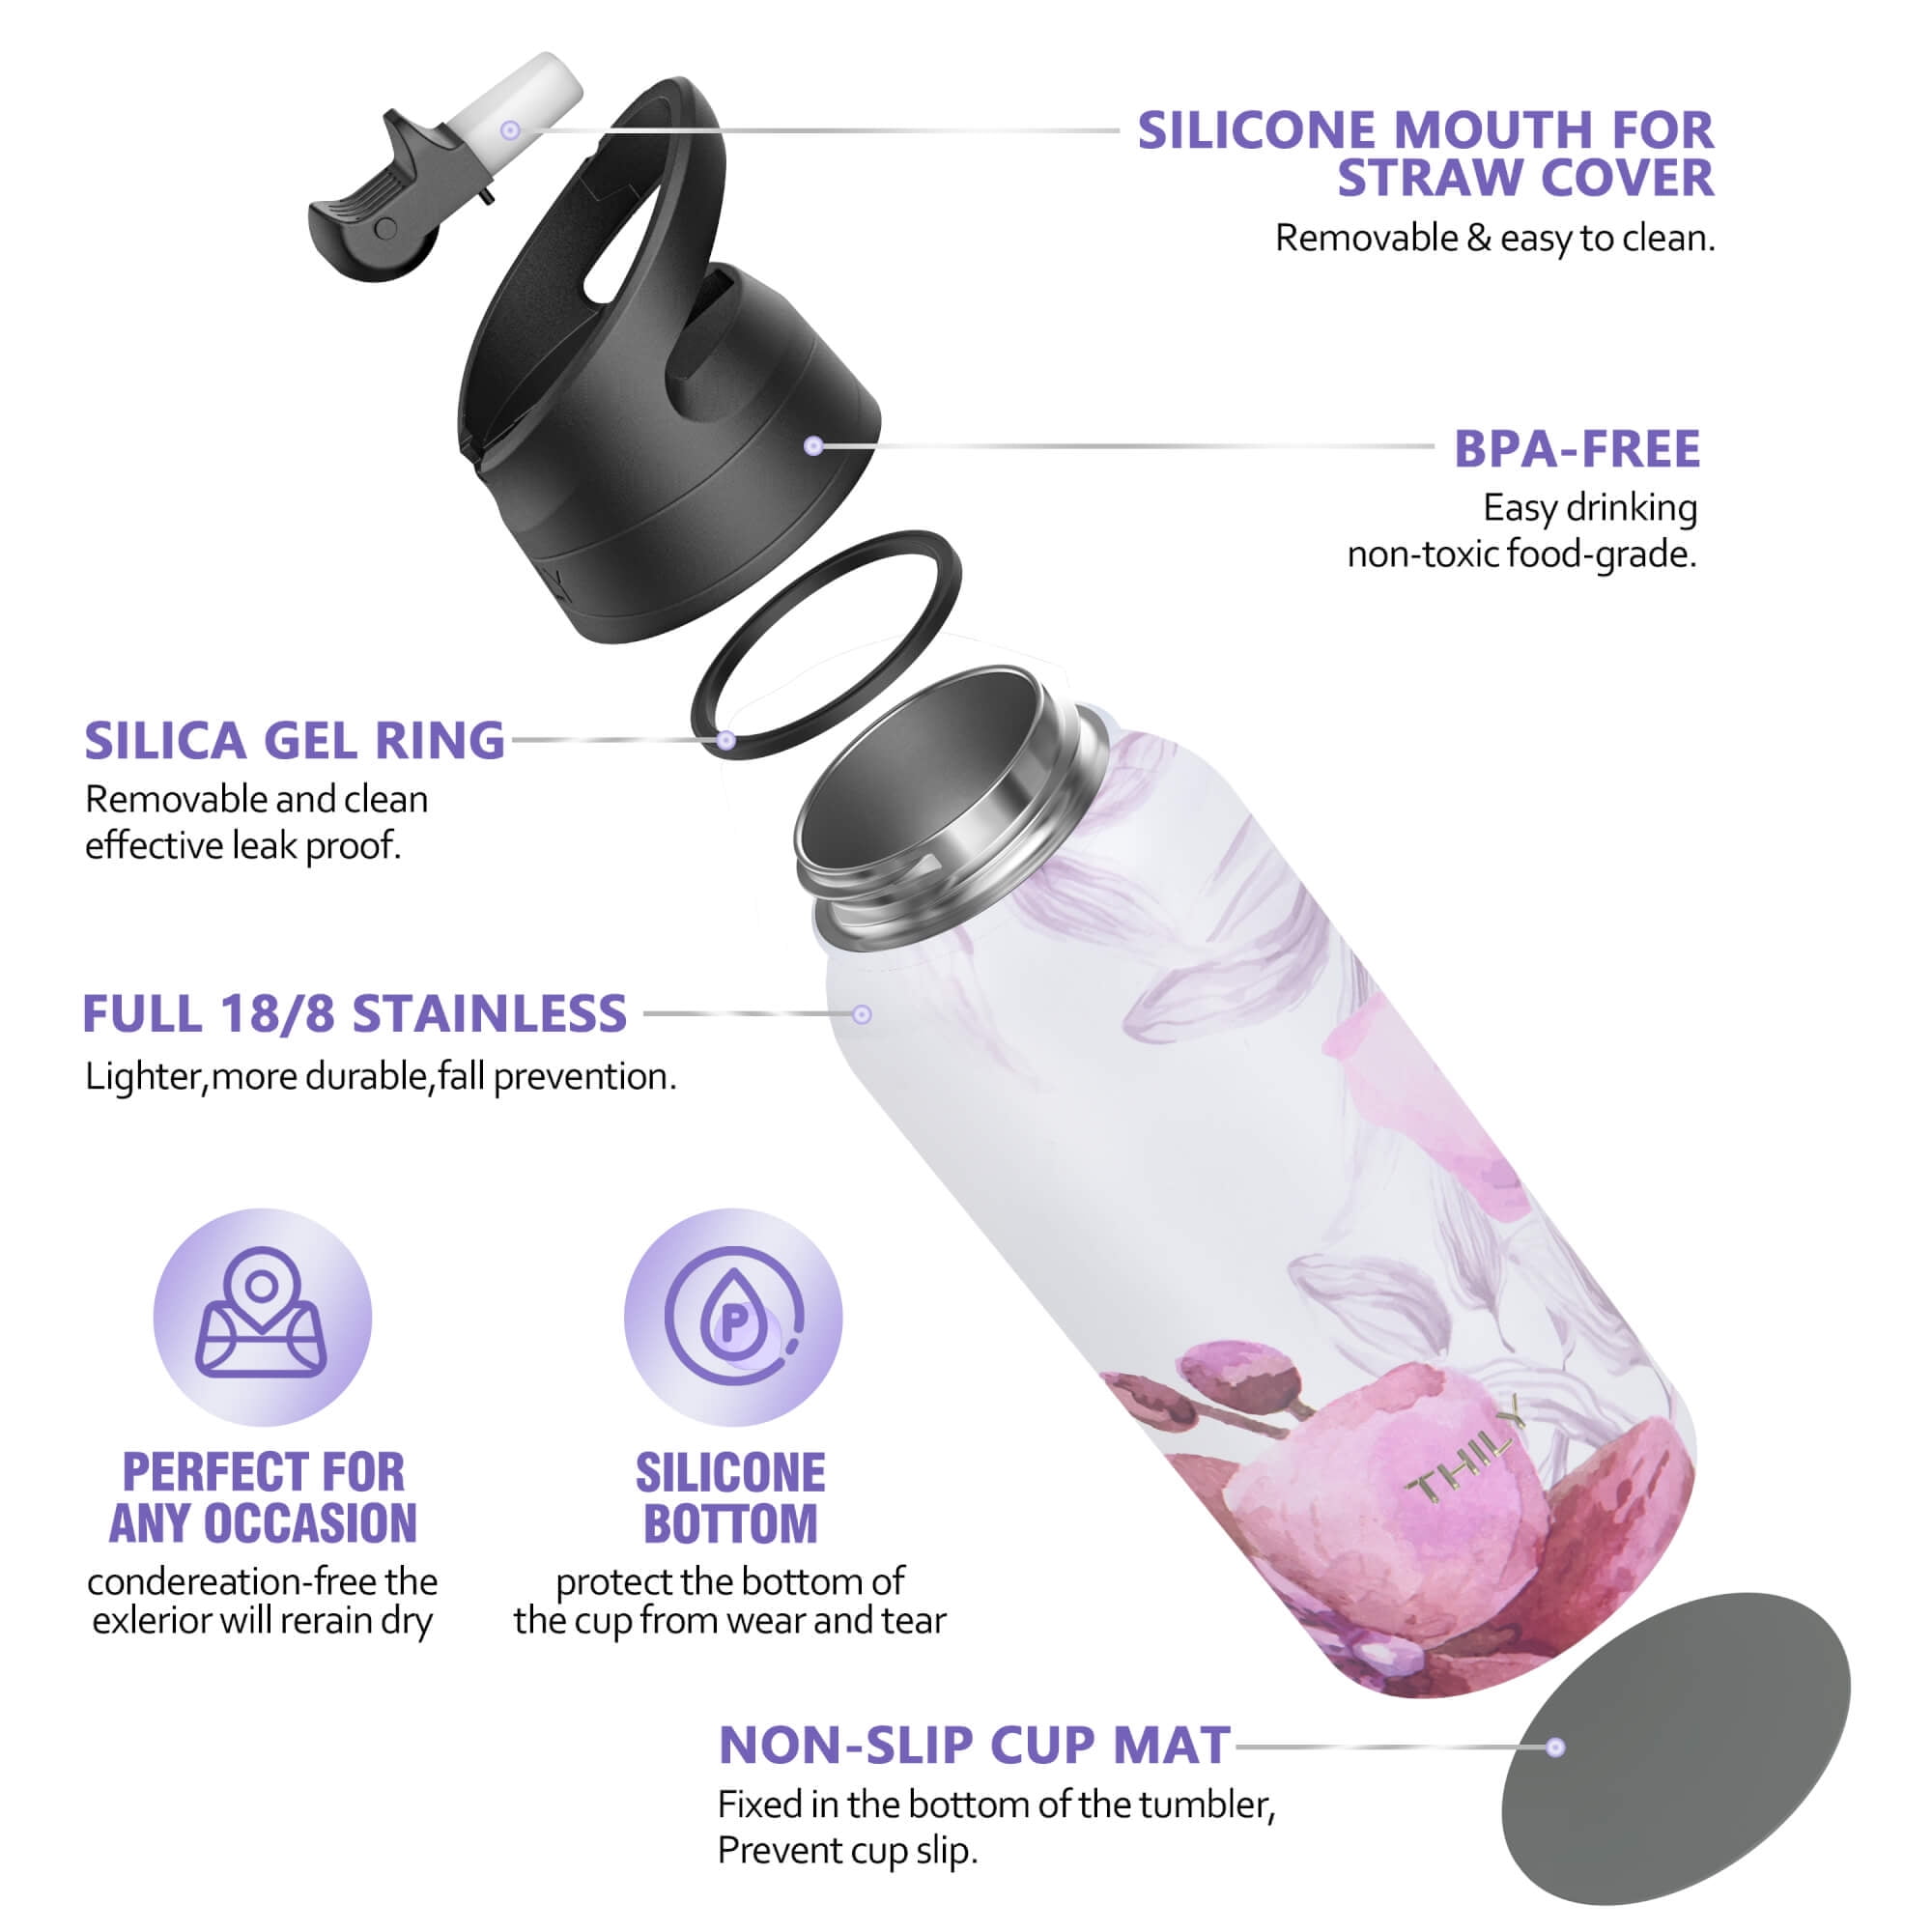 Hunsun 32oz Stainless Steel Double-Walled Vacuum Insulated Sports Water  Bottle: Keep Your Drinks Refreshingly Cold or Piping Hot All Day Long